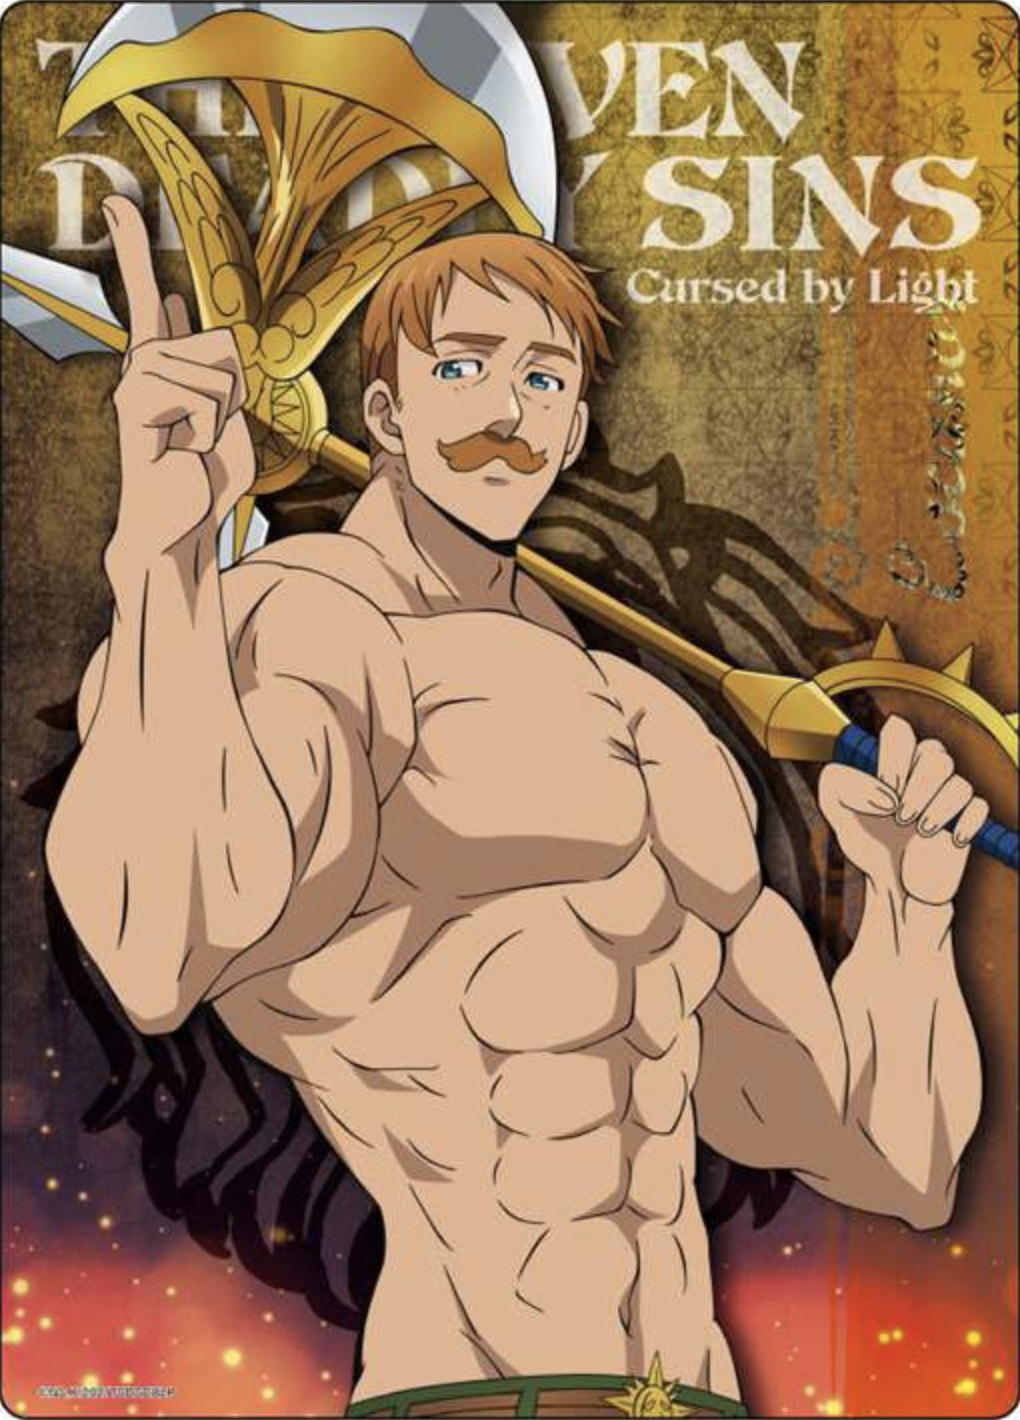 The Seven Deadly Sins (2014) - Filmaffinity